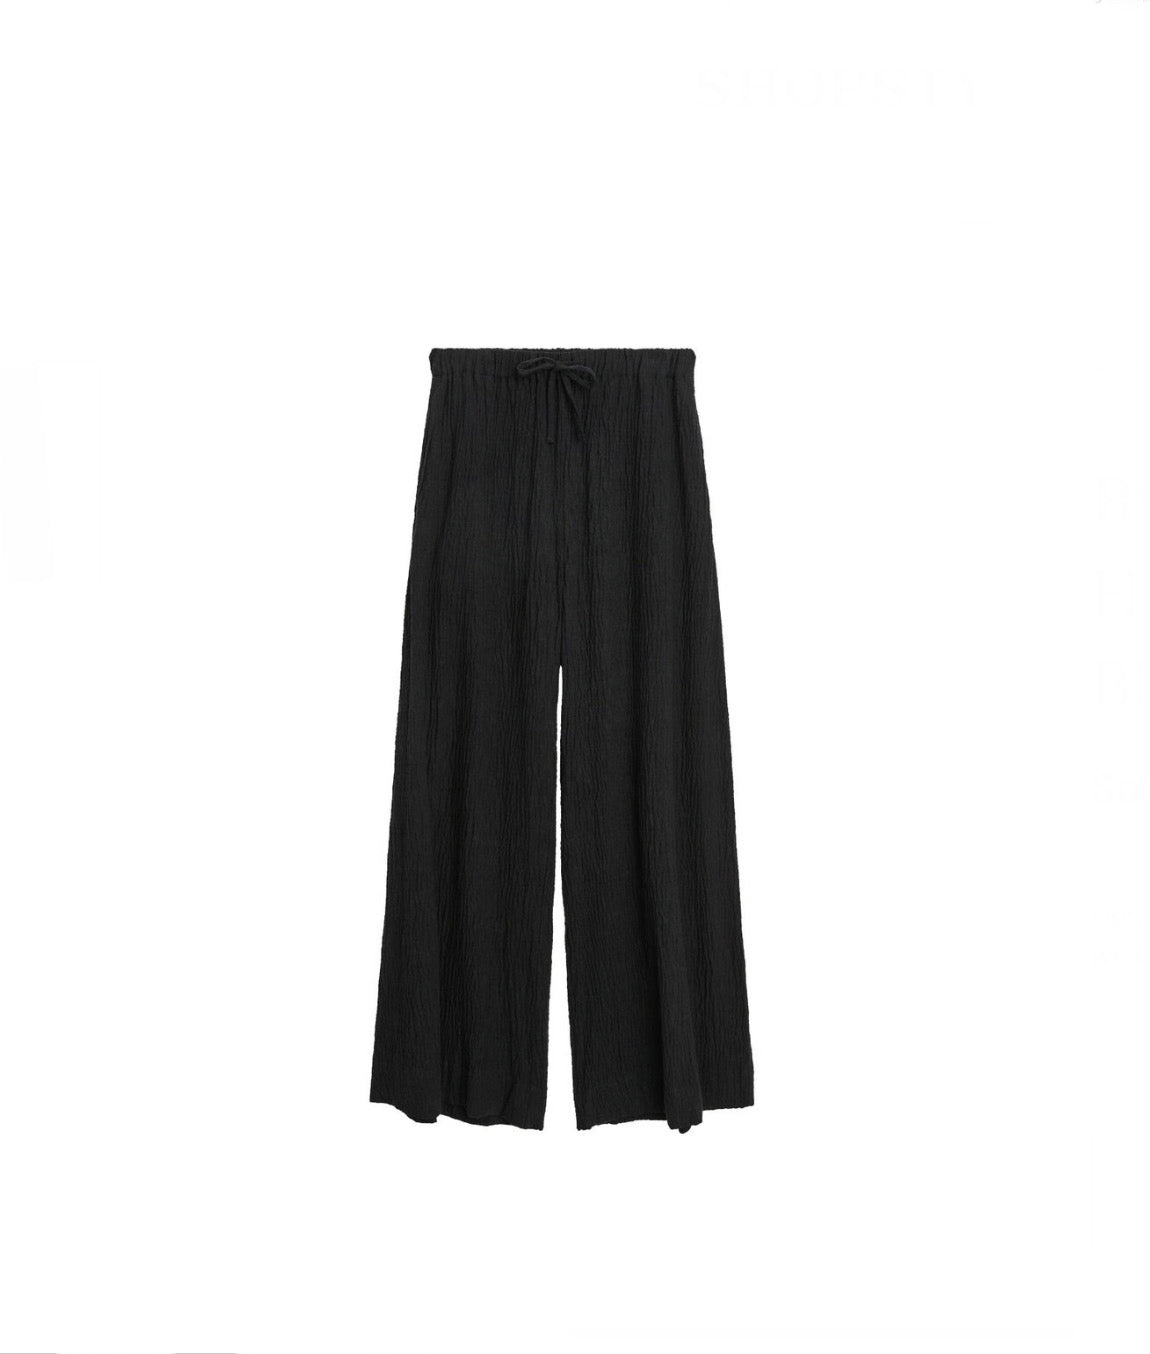 Load image into Gallery viewer, Malene Birger Black Pisca Tie Waist Trousers
